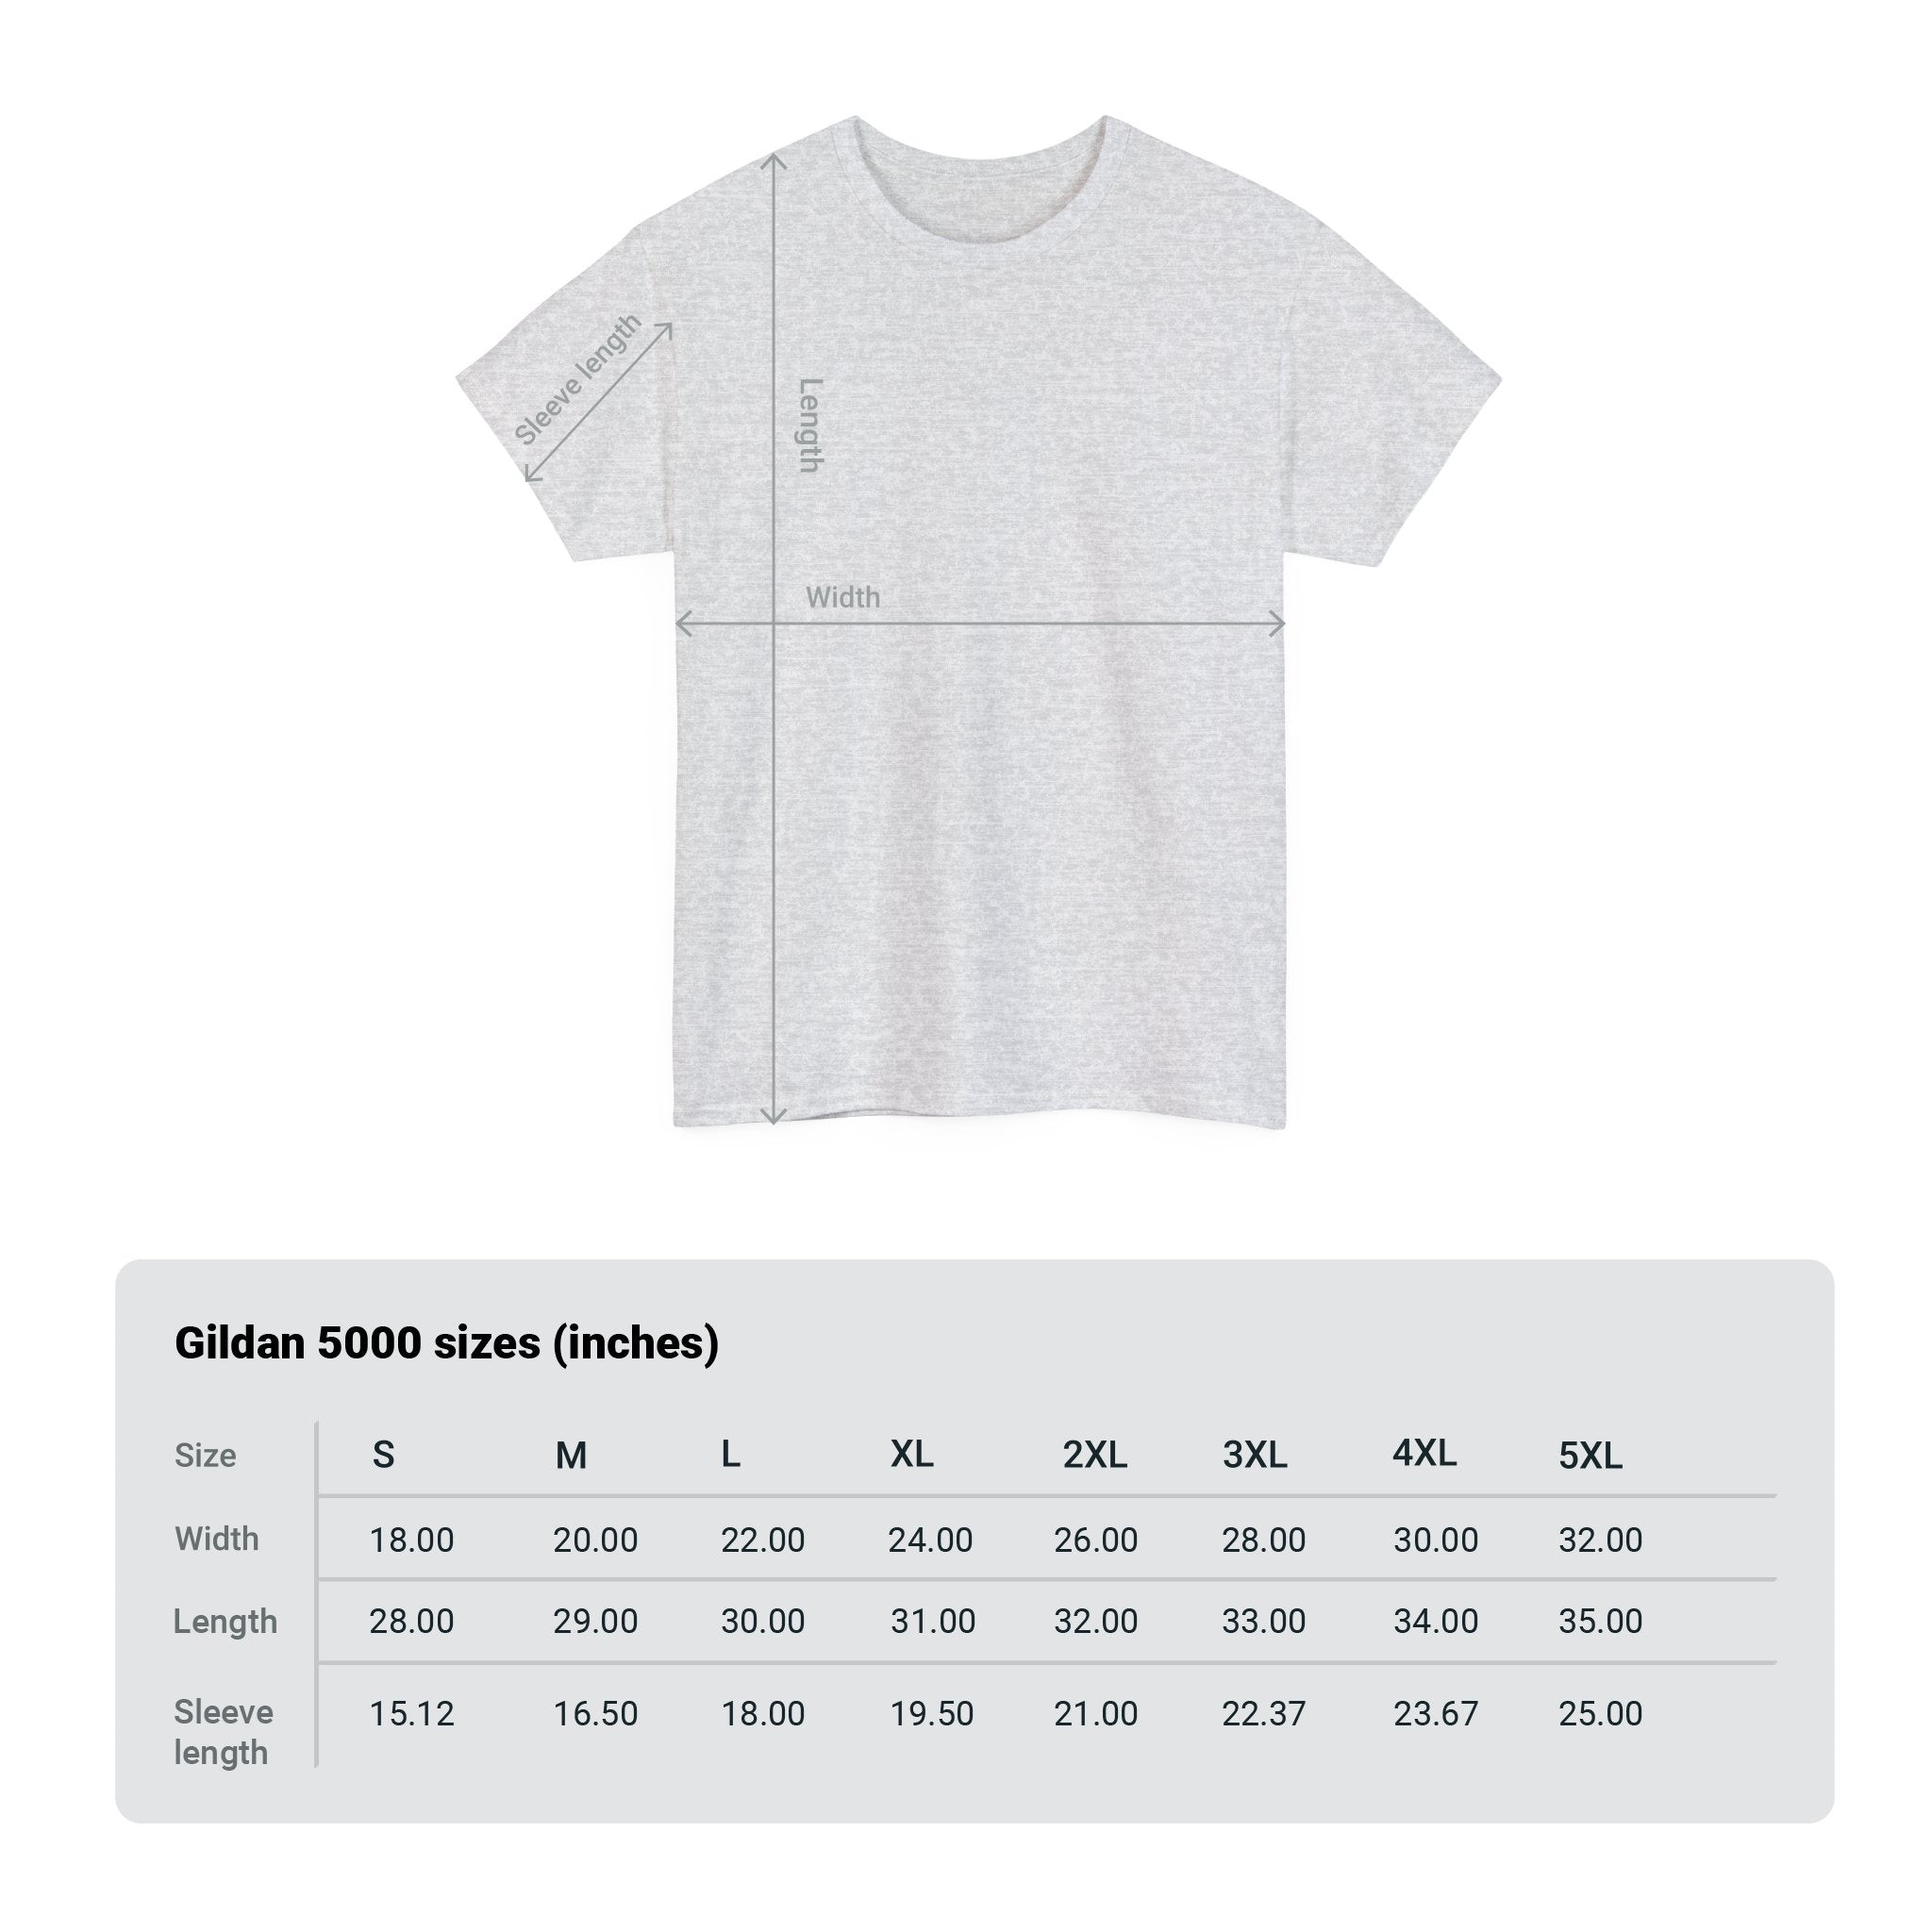 Stardew Valley I'd Rather Be Playing Unisex Heavy Cotton Tee